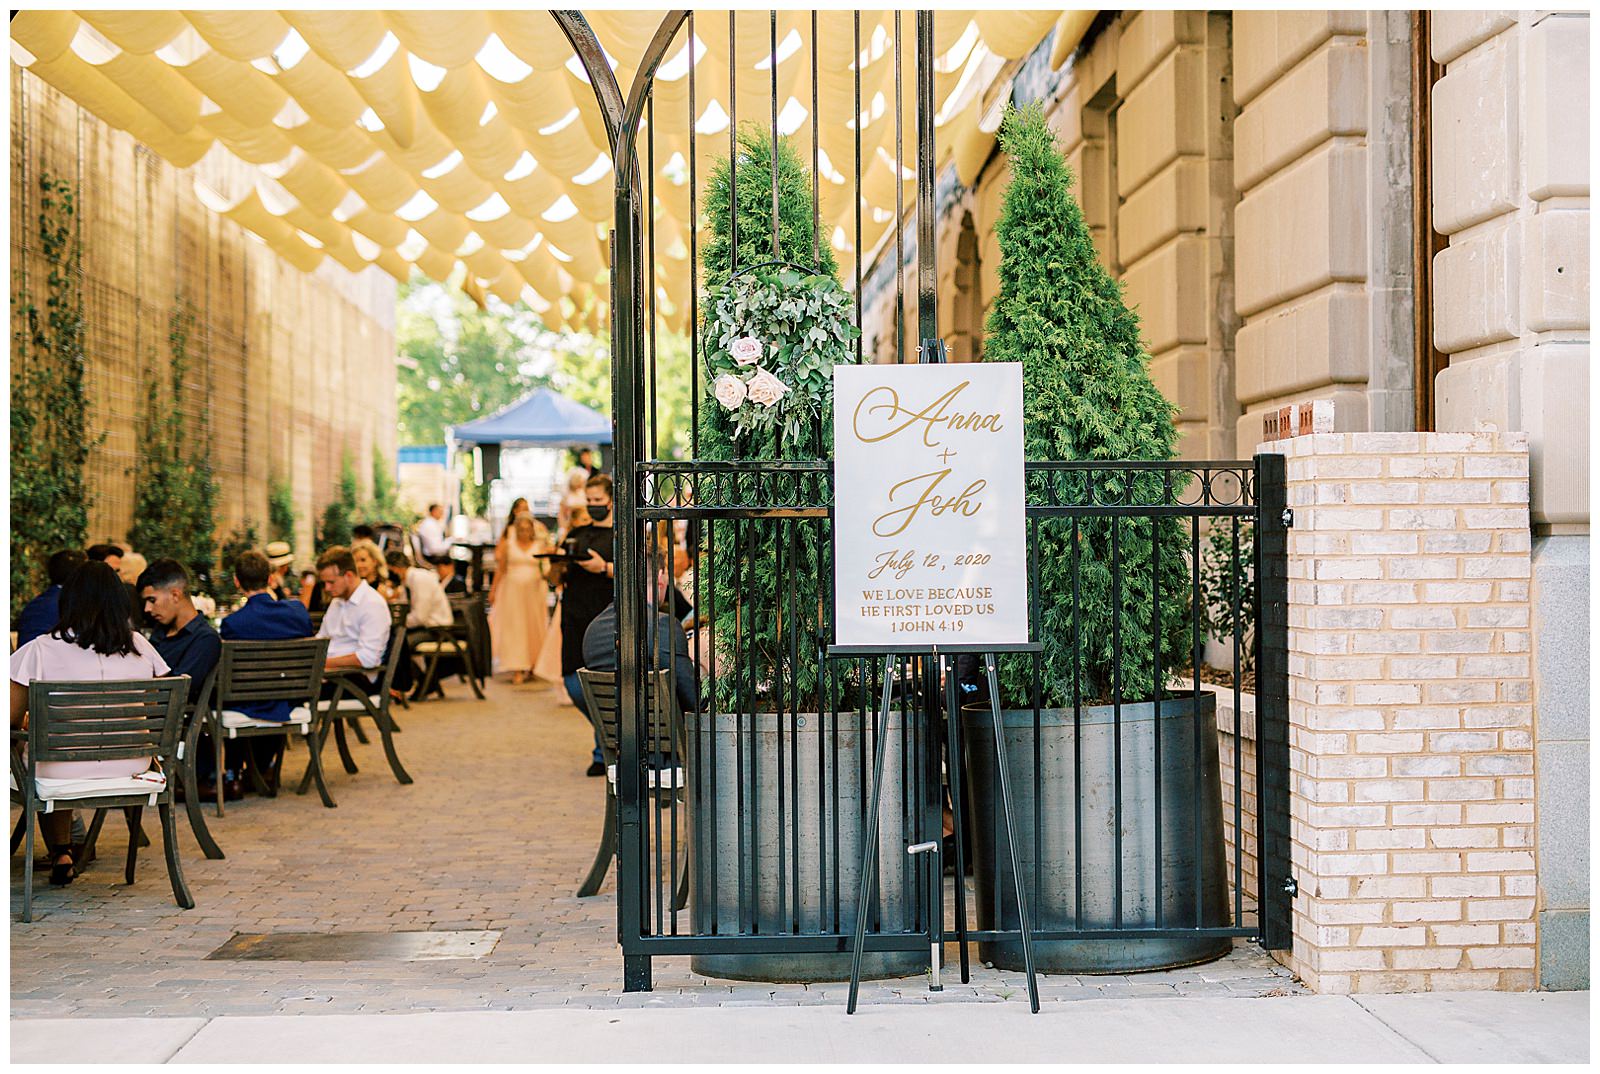 esquire hotel outdoor patio wedding reception with gold lettered wedding sign